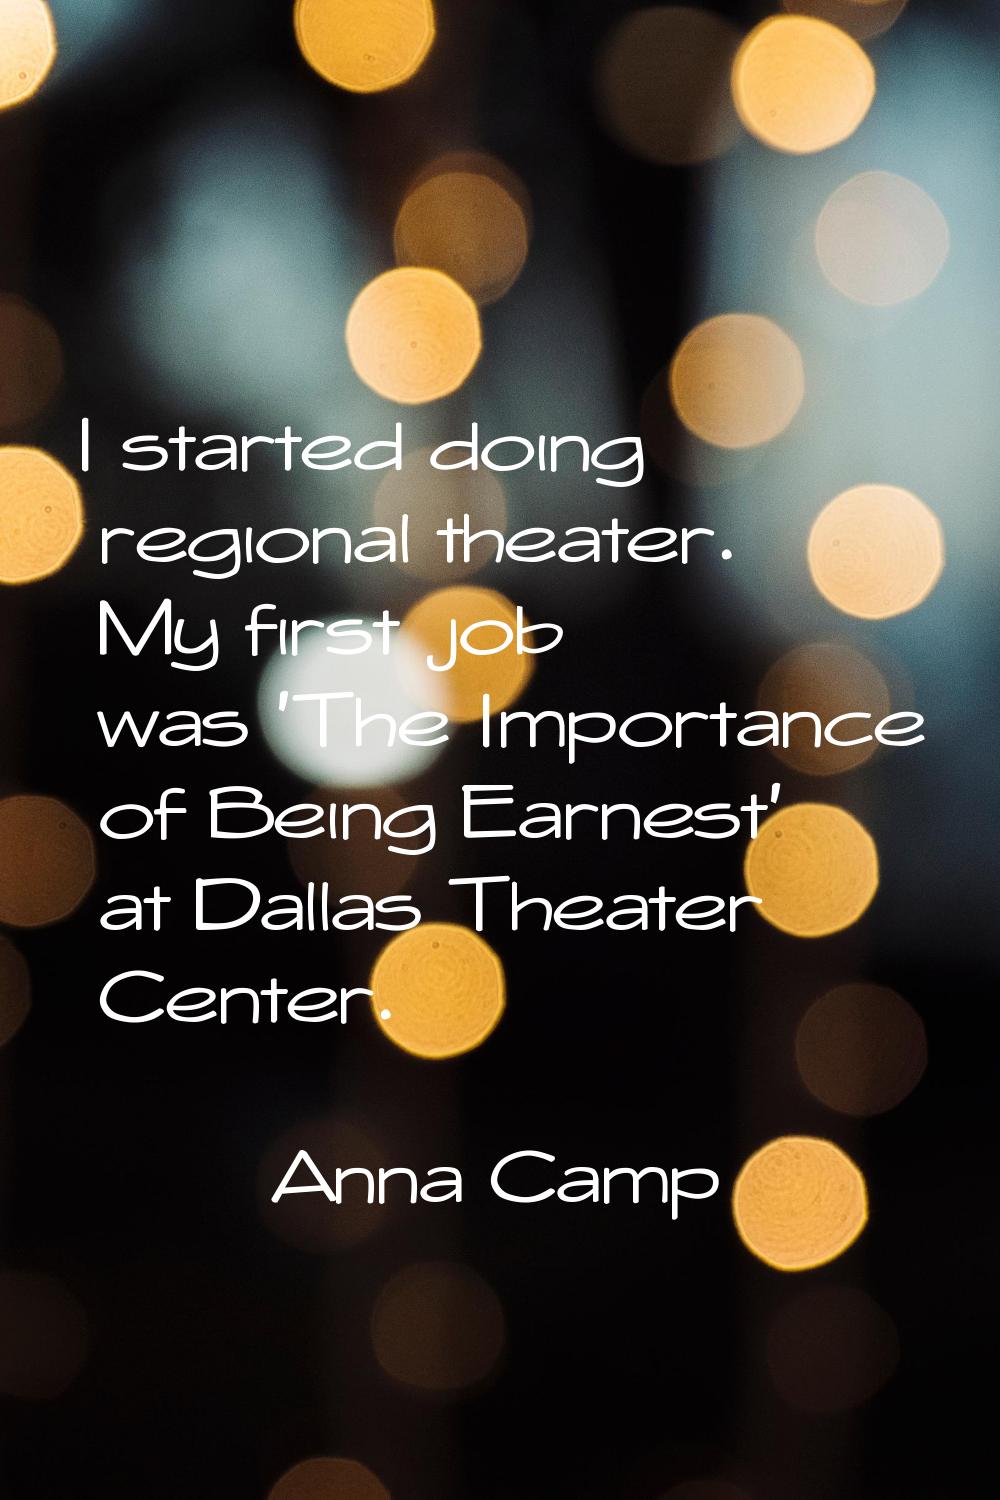 I started doing regional theater. My first job was 'The Importance of Being Earnest' at Dallas Thea